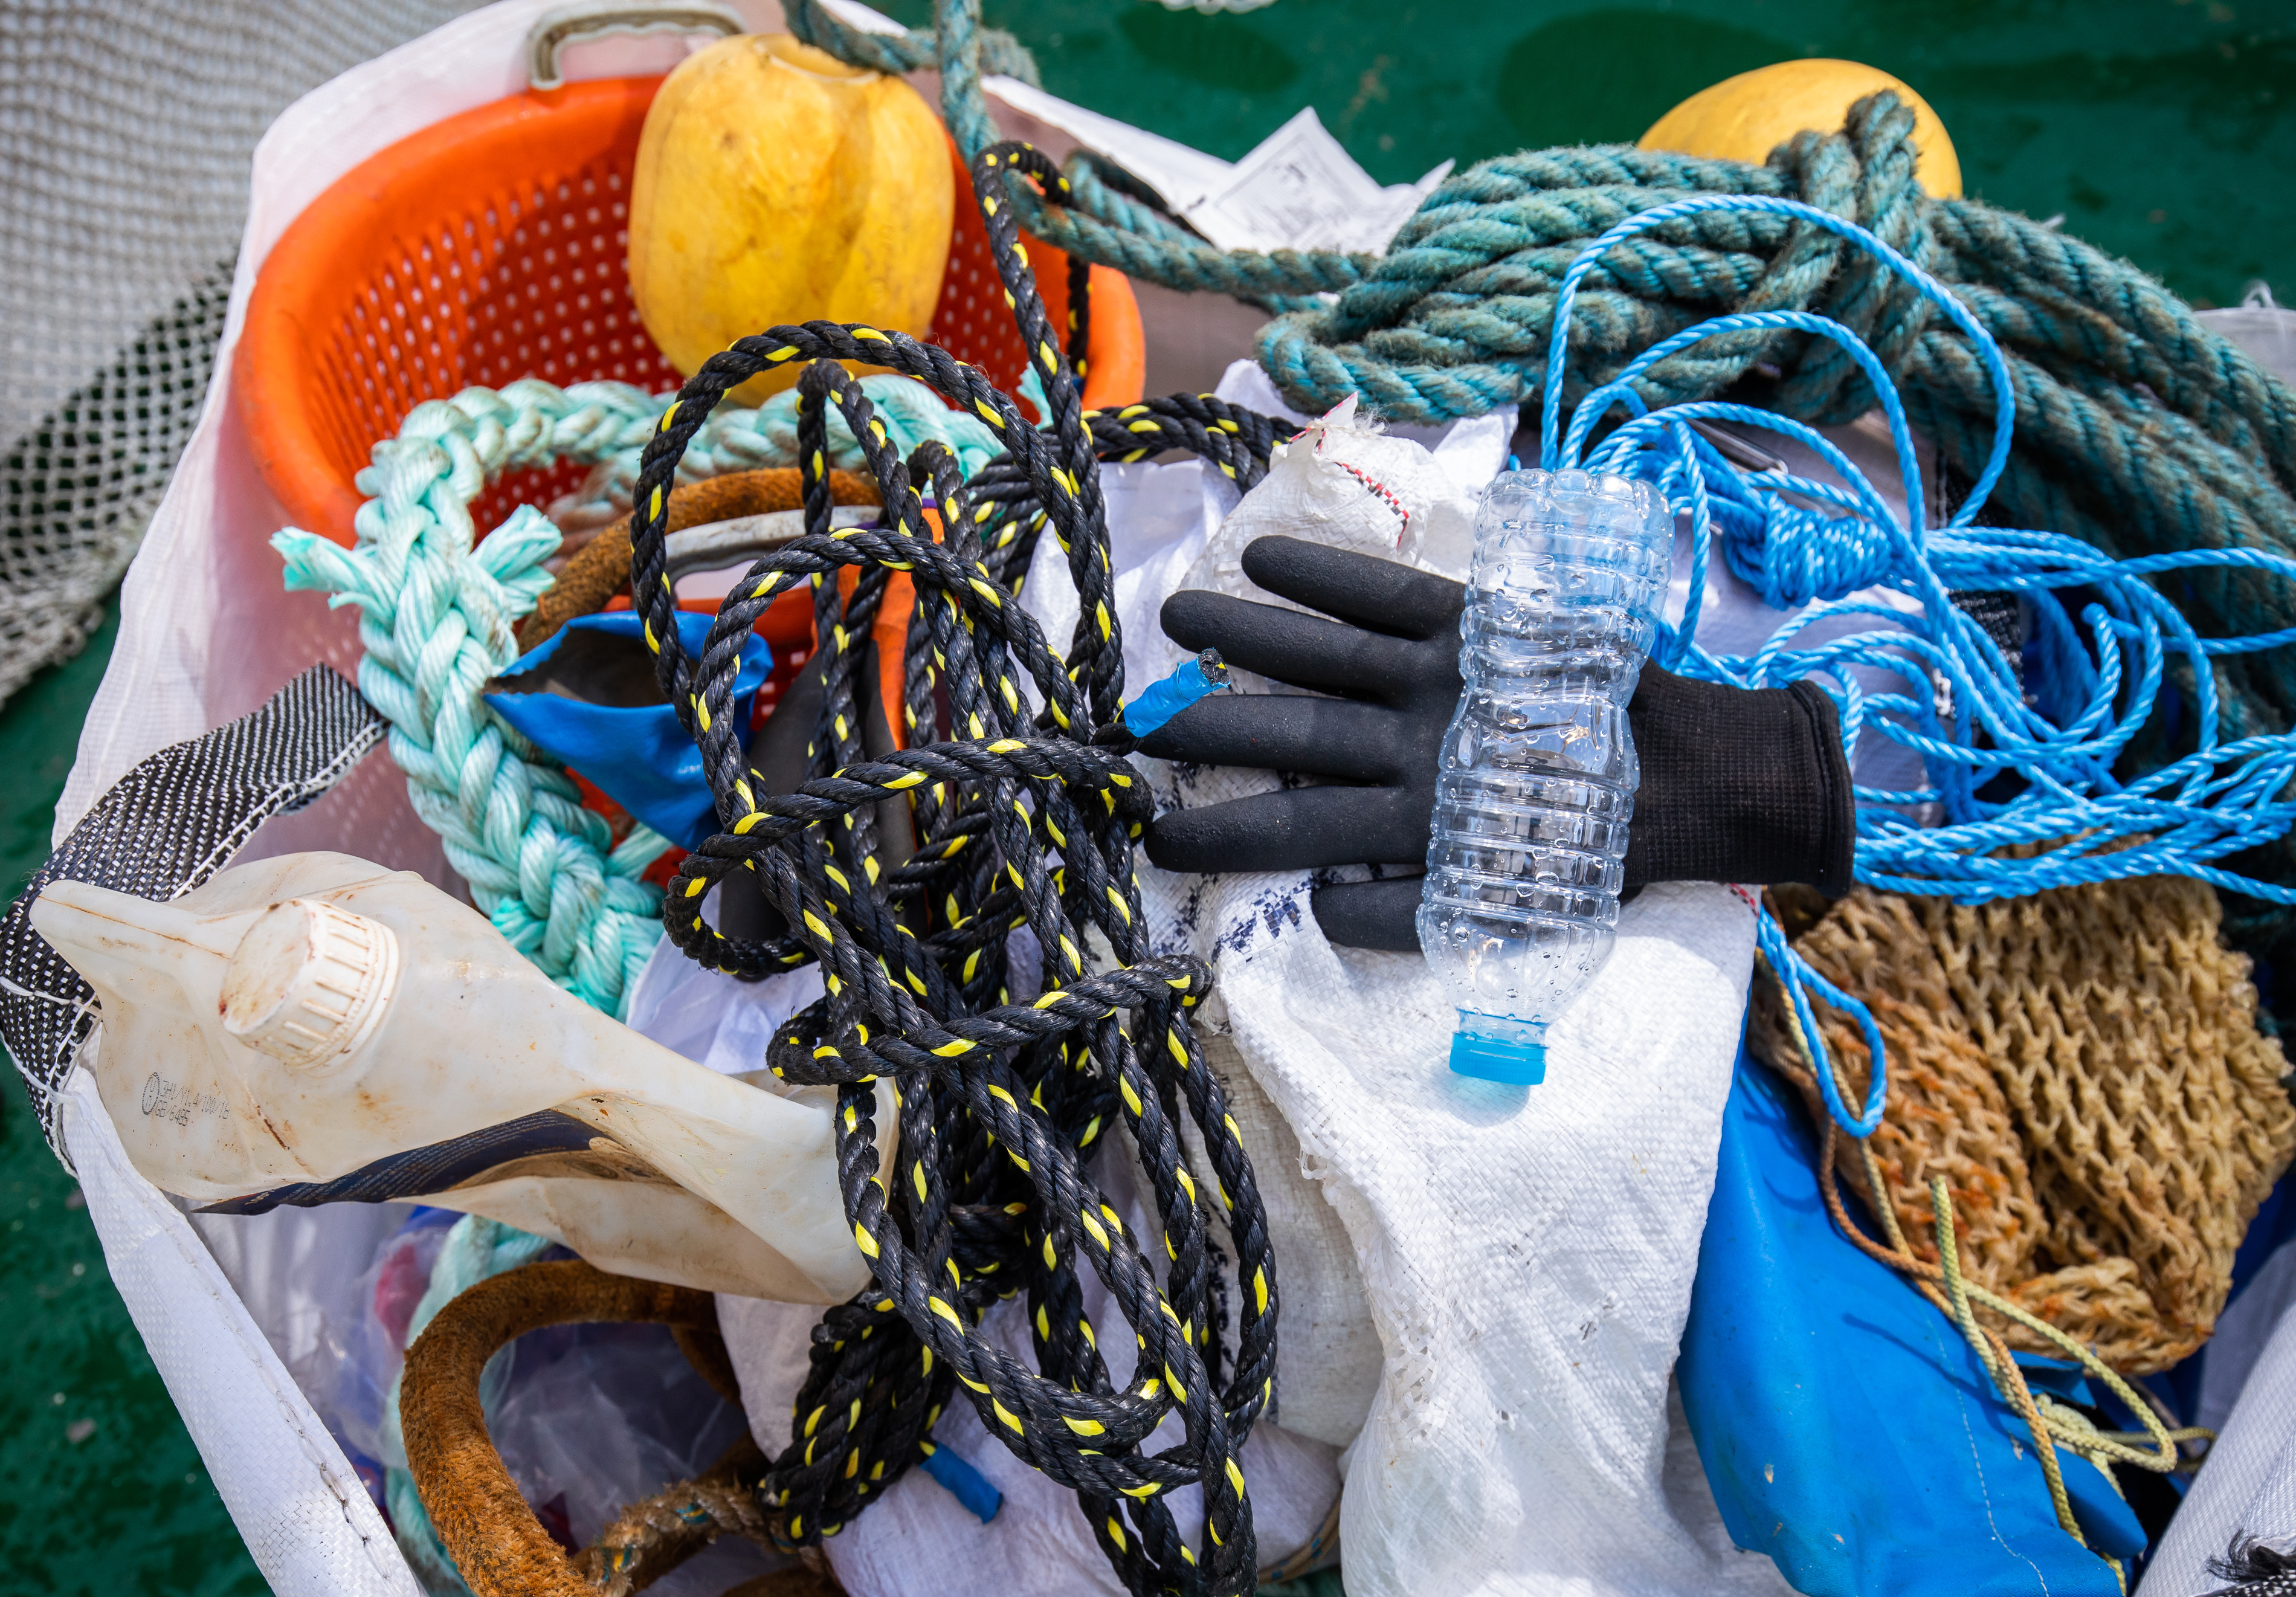 Waste collected through the Fishing for Plastic initiative includes marine waste, as well as everyday plastic items. 